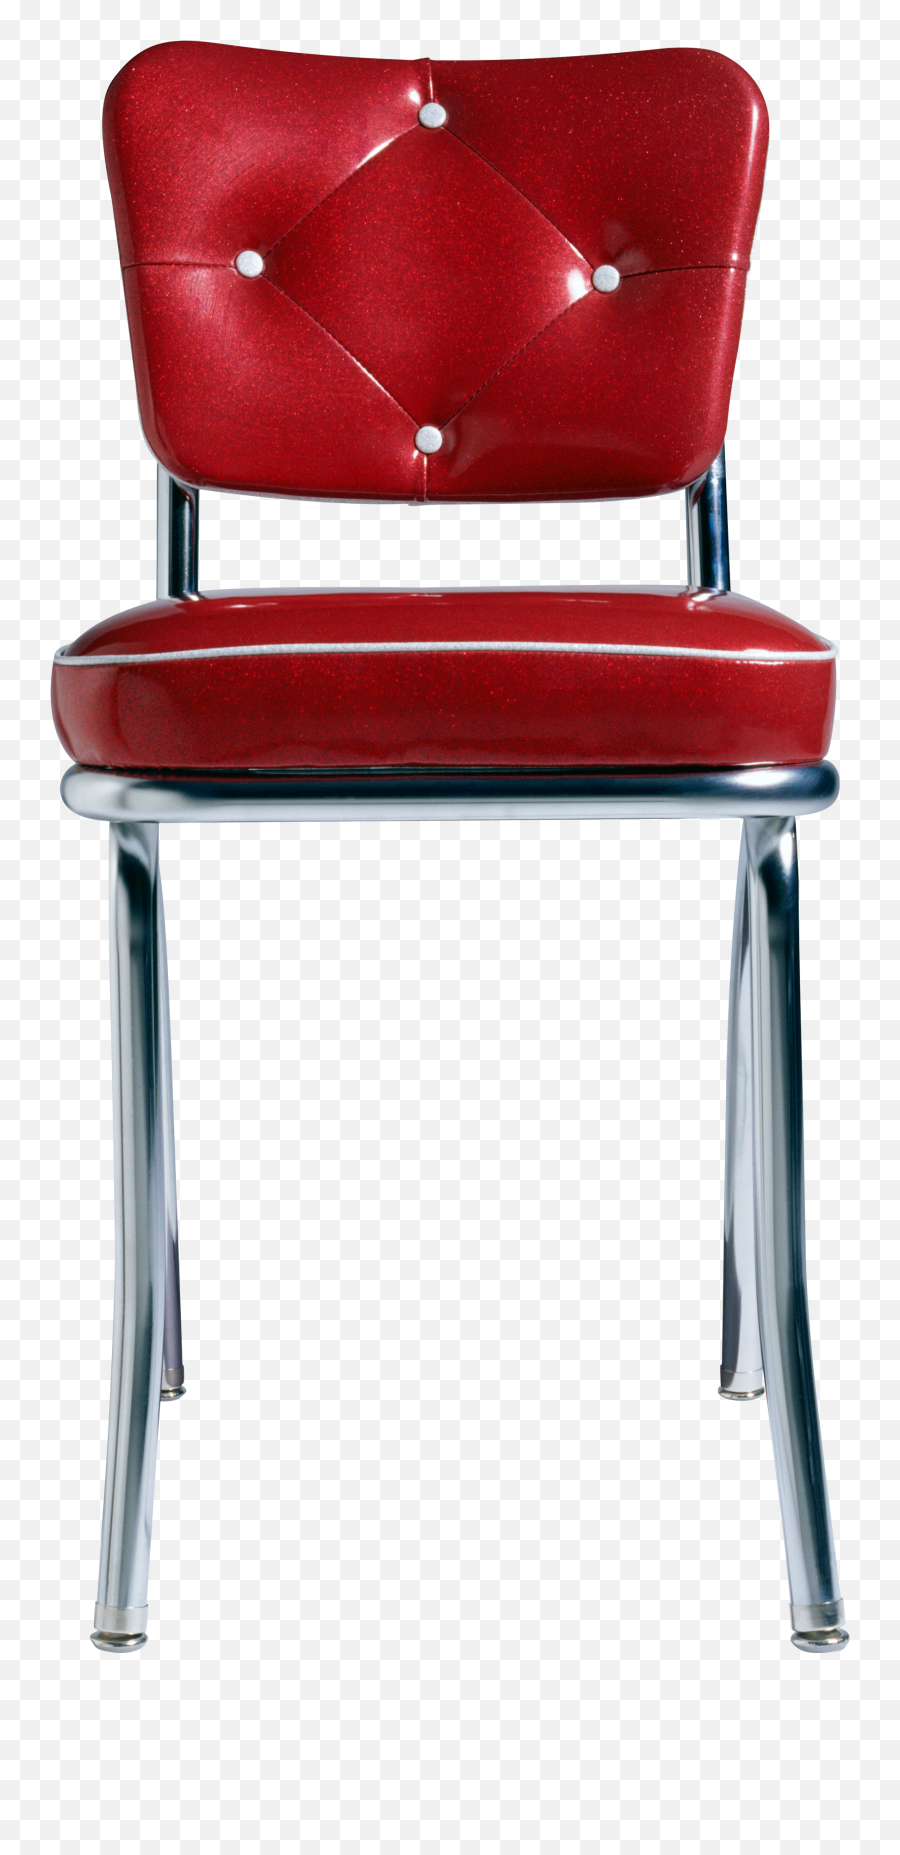 Chair Png Images Free Download - Chair Png Full Hd,Stool Png